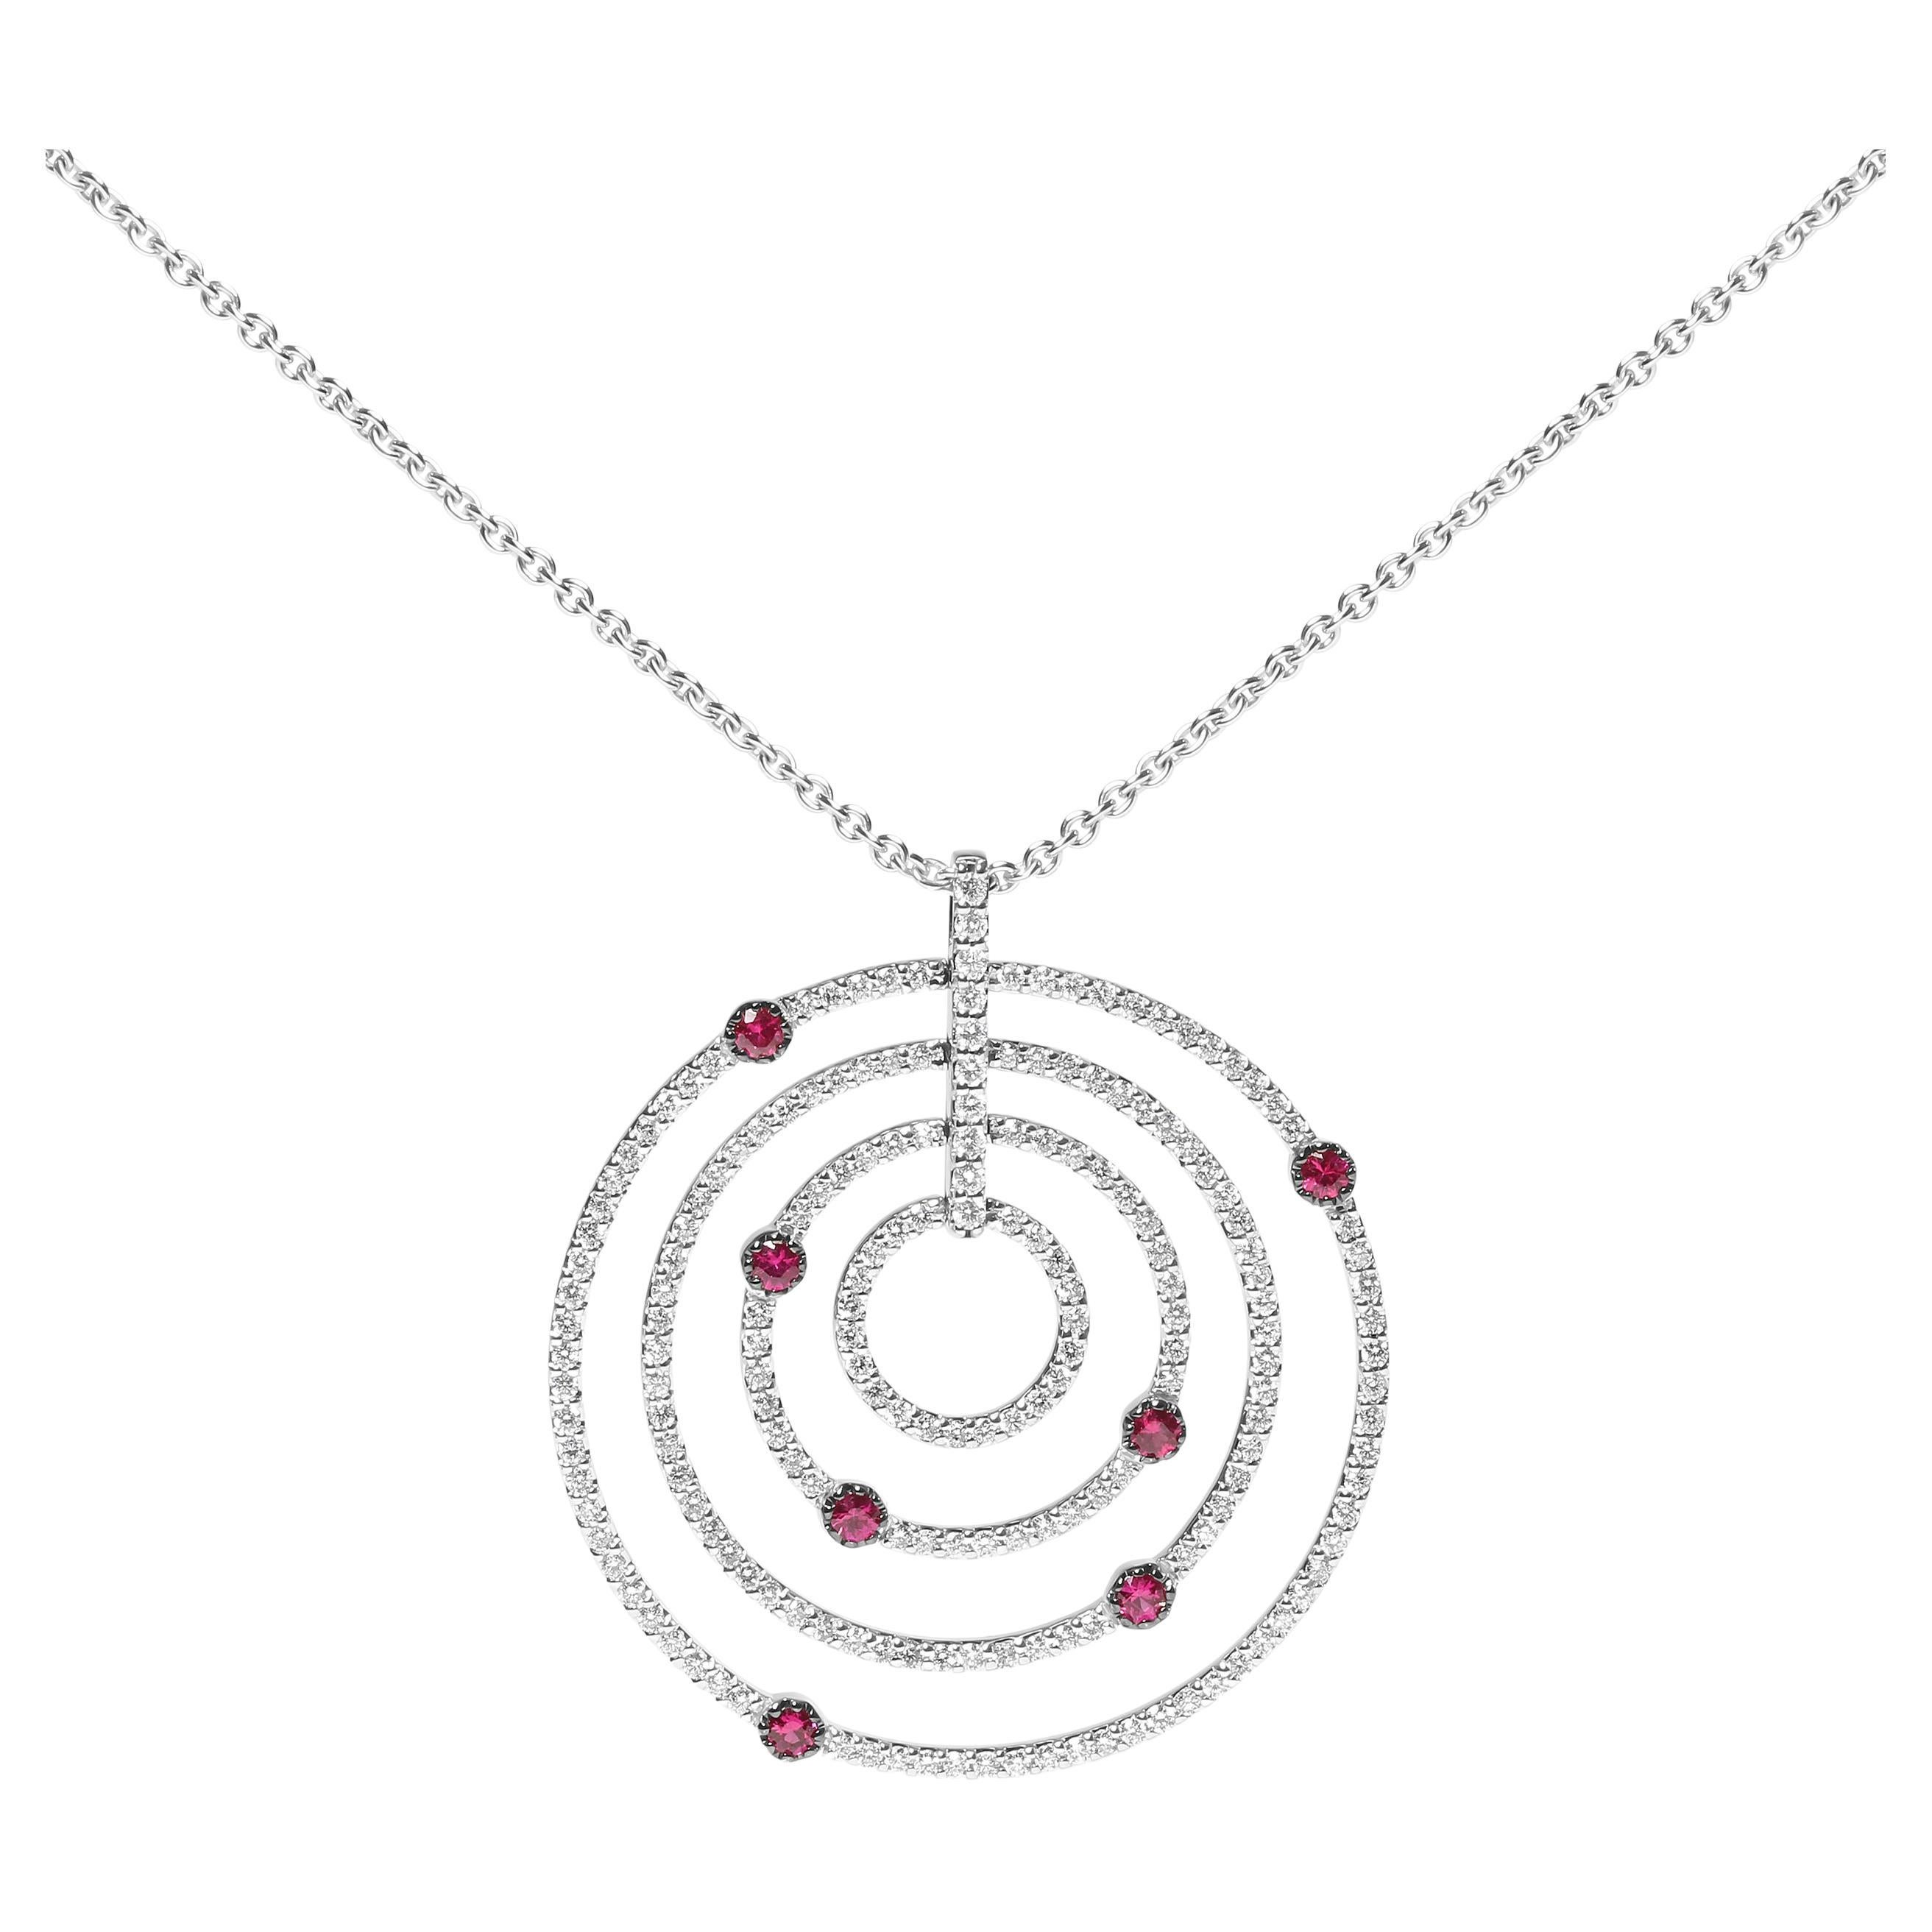 18K White Gold 2 1/6 Carat Diamonds & Red Ruby Openwork Circles Pendant Necklace